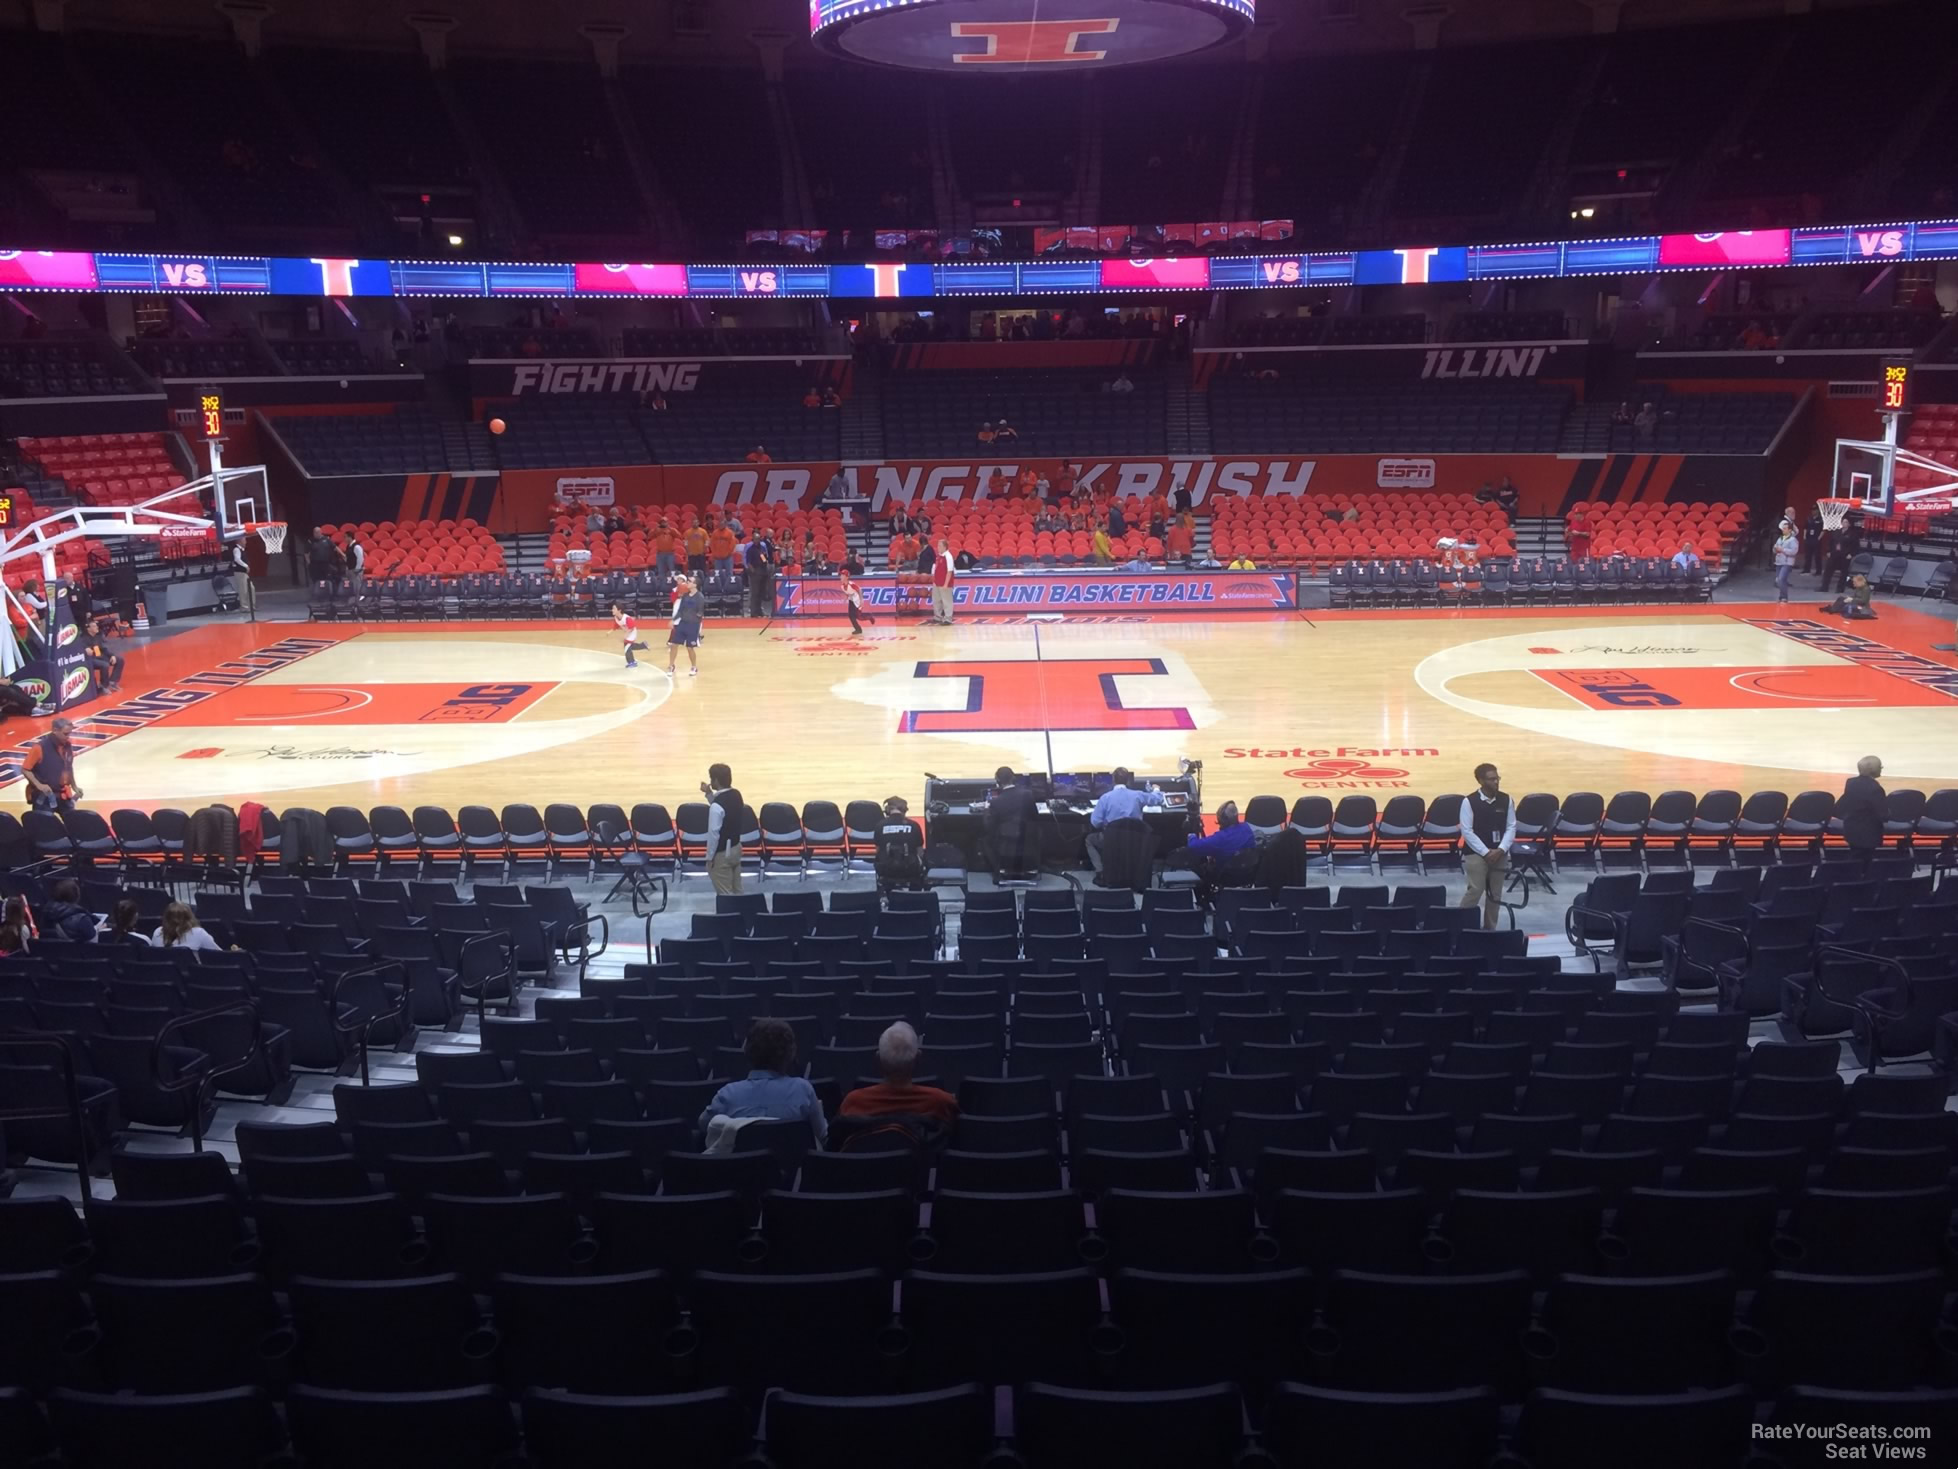 section 101, row 16 seat view  - state farm center